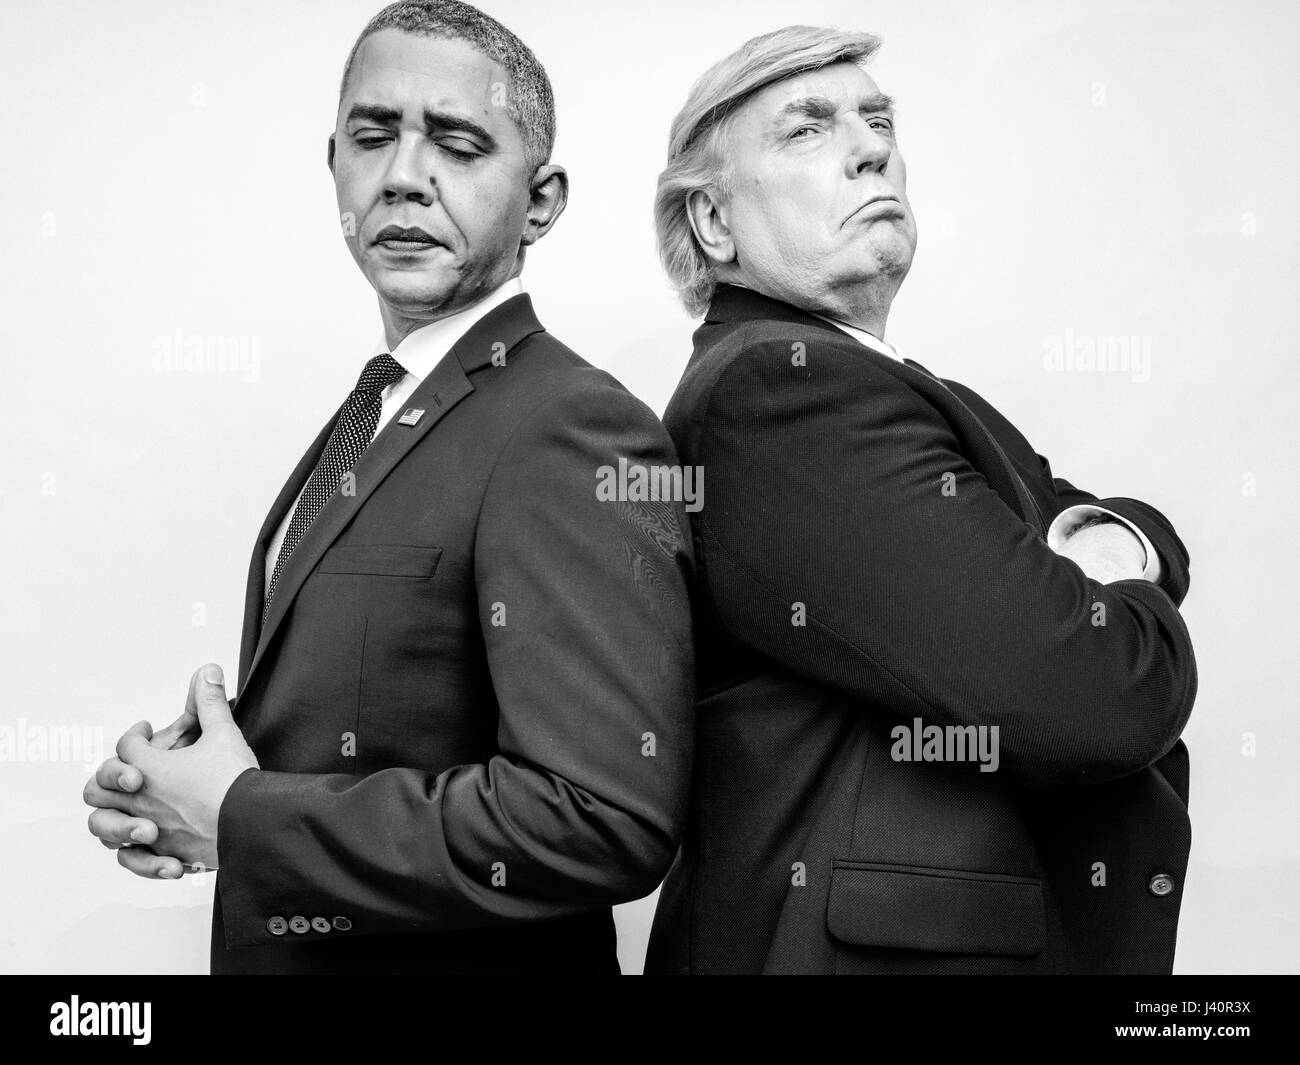 President Donald J Trump and President Obama lookalikes meet for a studio shoot in Hong Kong. Stock Photo